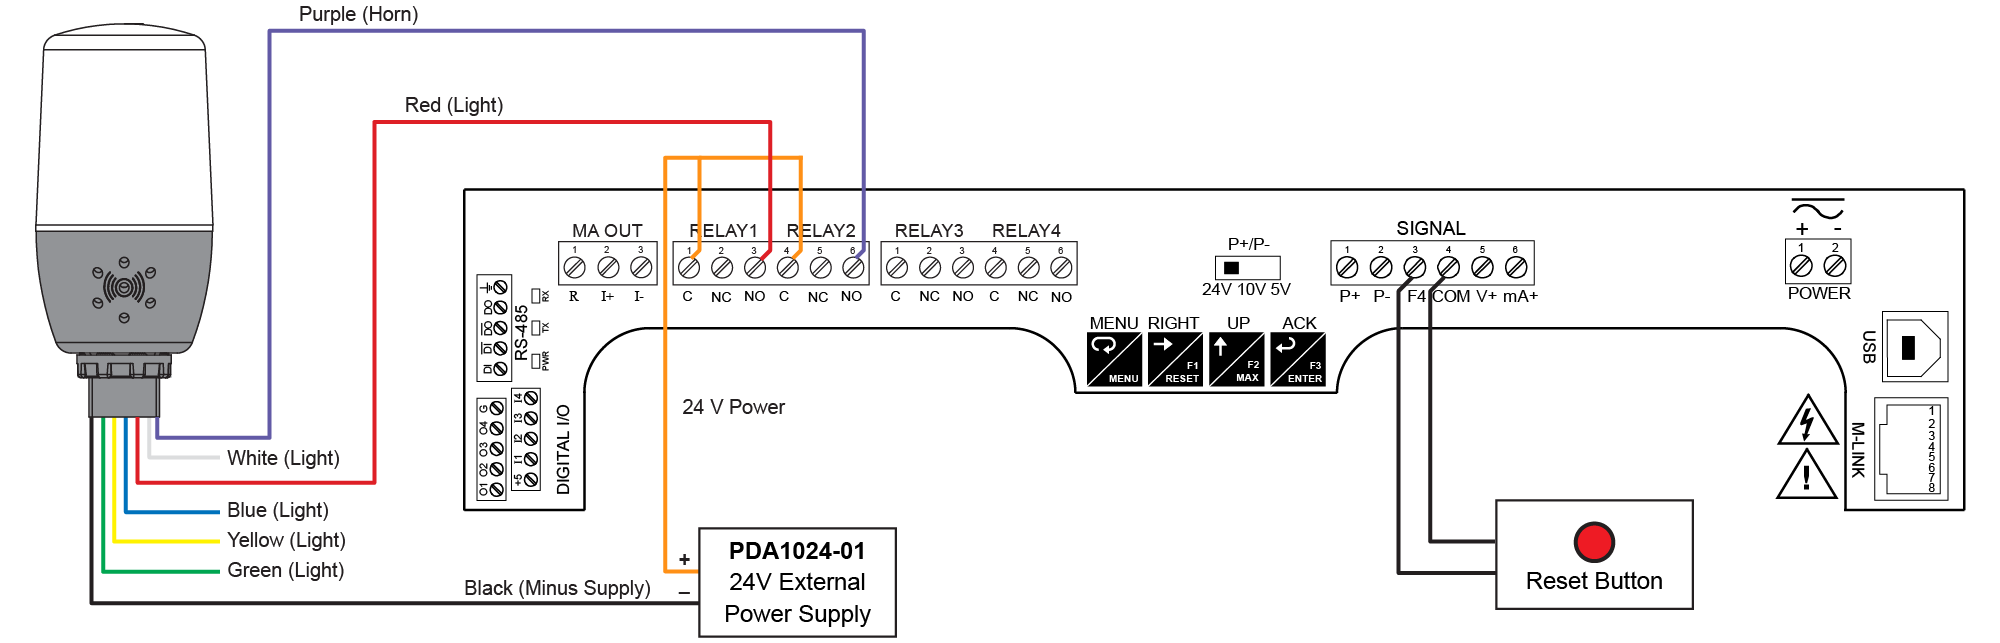 Wiring Connections for MOD-PD2LH5C Models Using PDA1024-01 External Power Supply